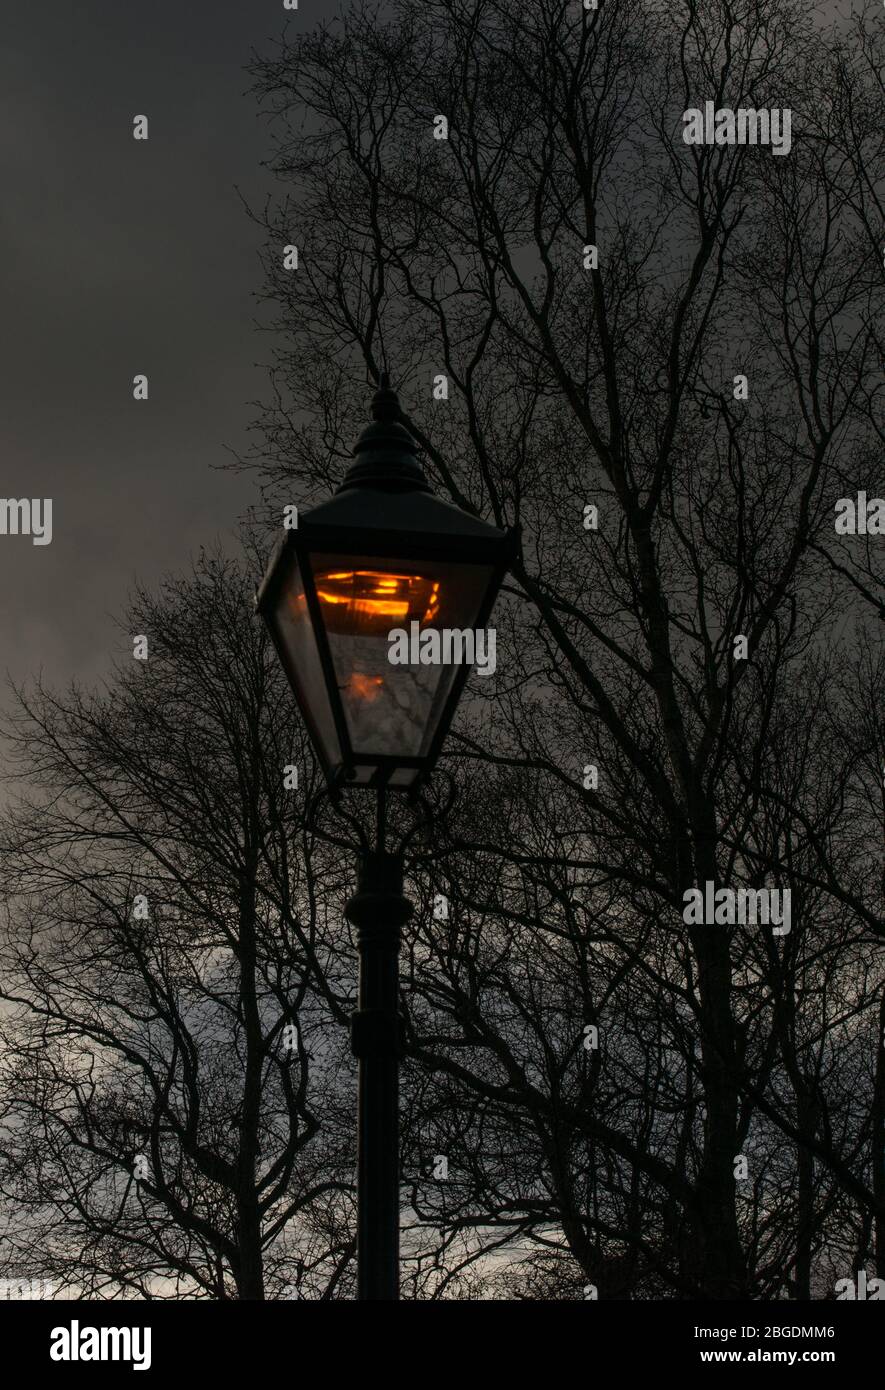 Moody image of street light just beginning to glow at dusk with silhouettes of leafless trees and branches in the background Stock Photo